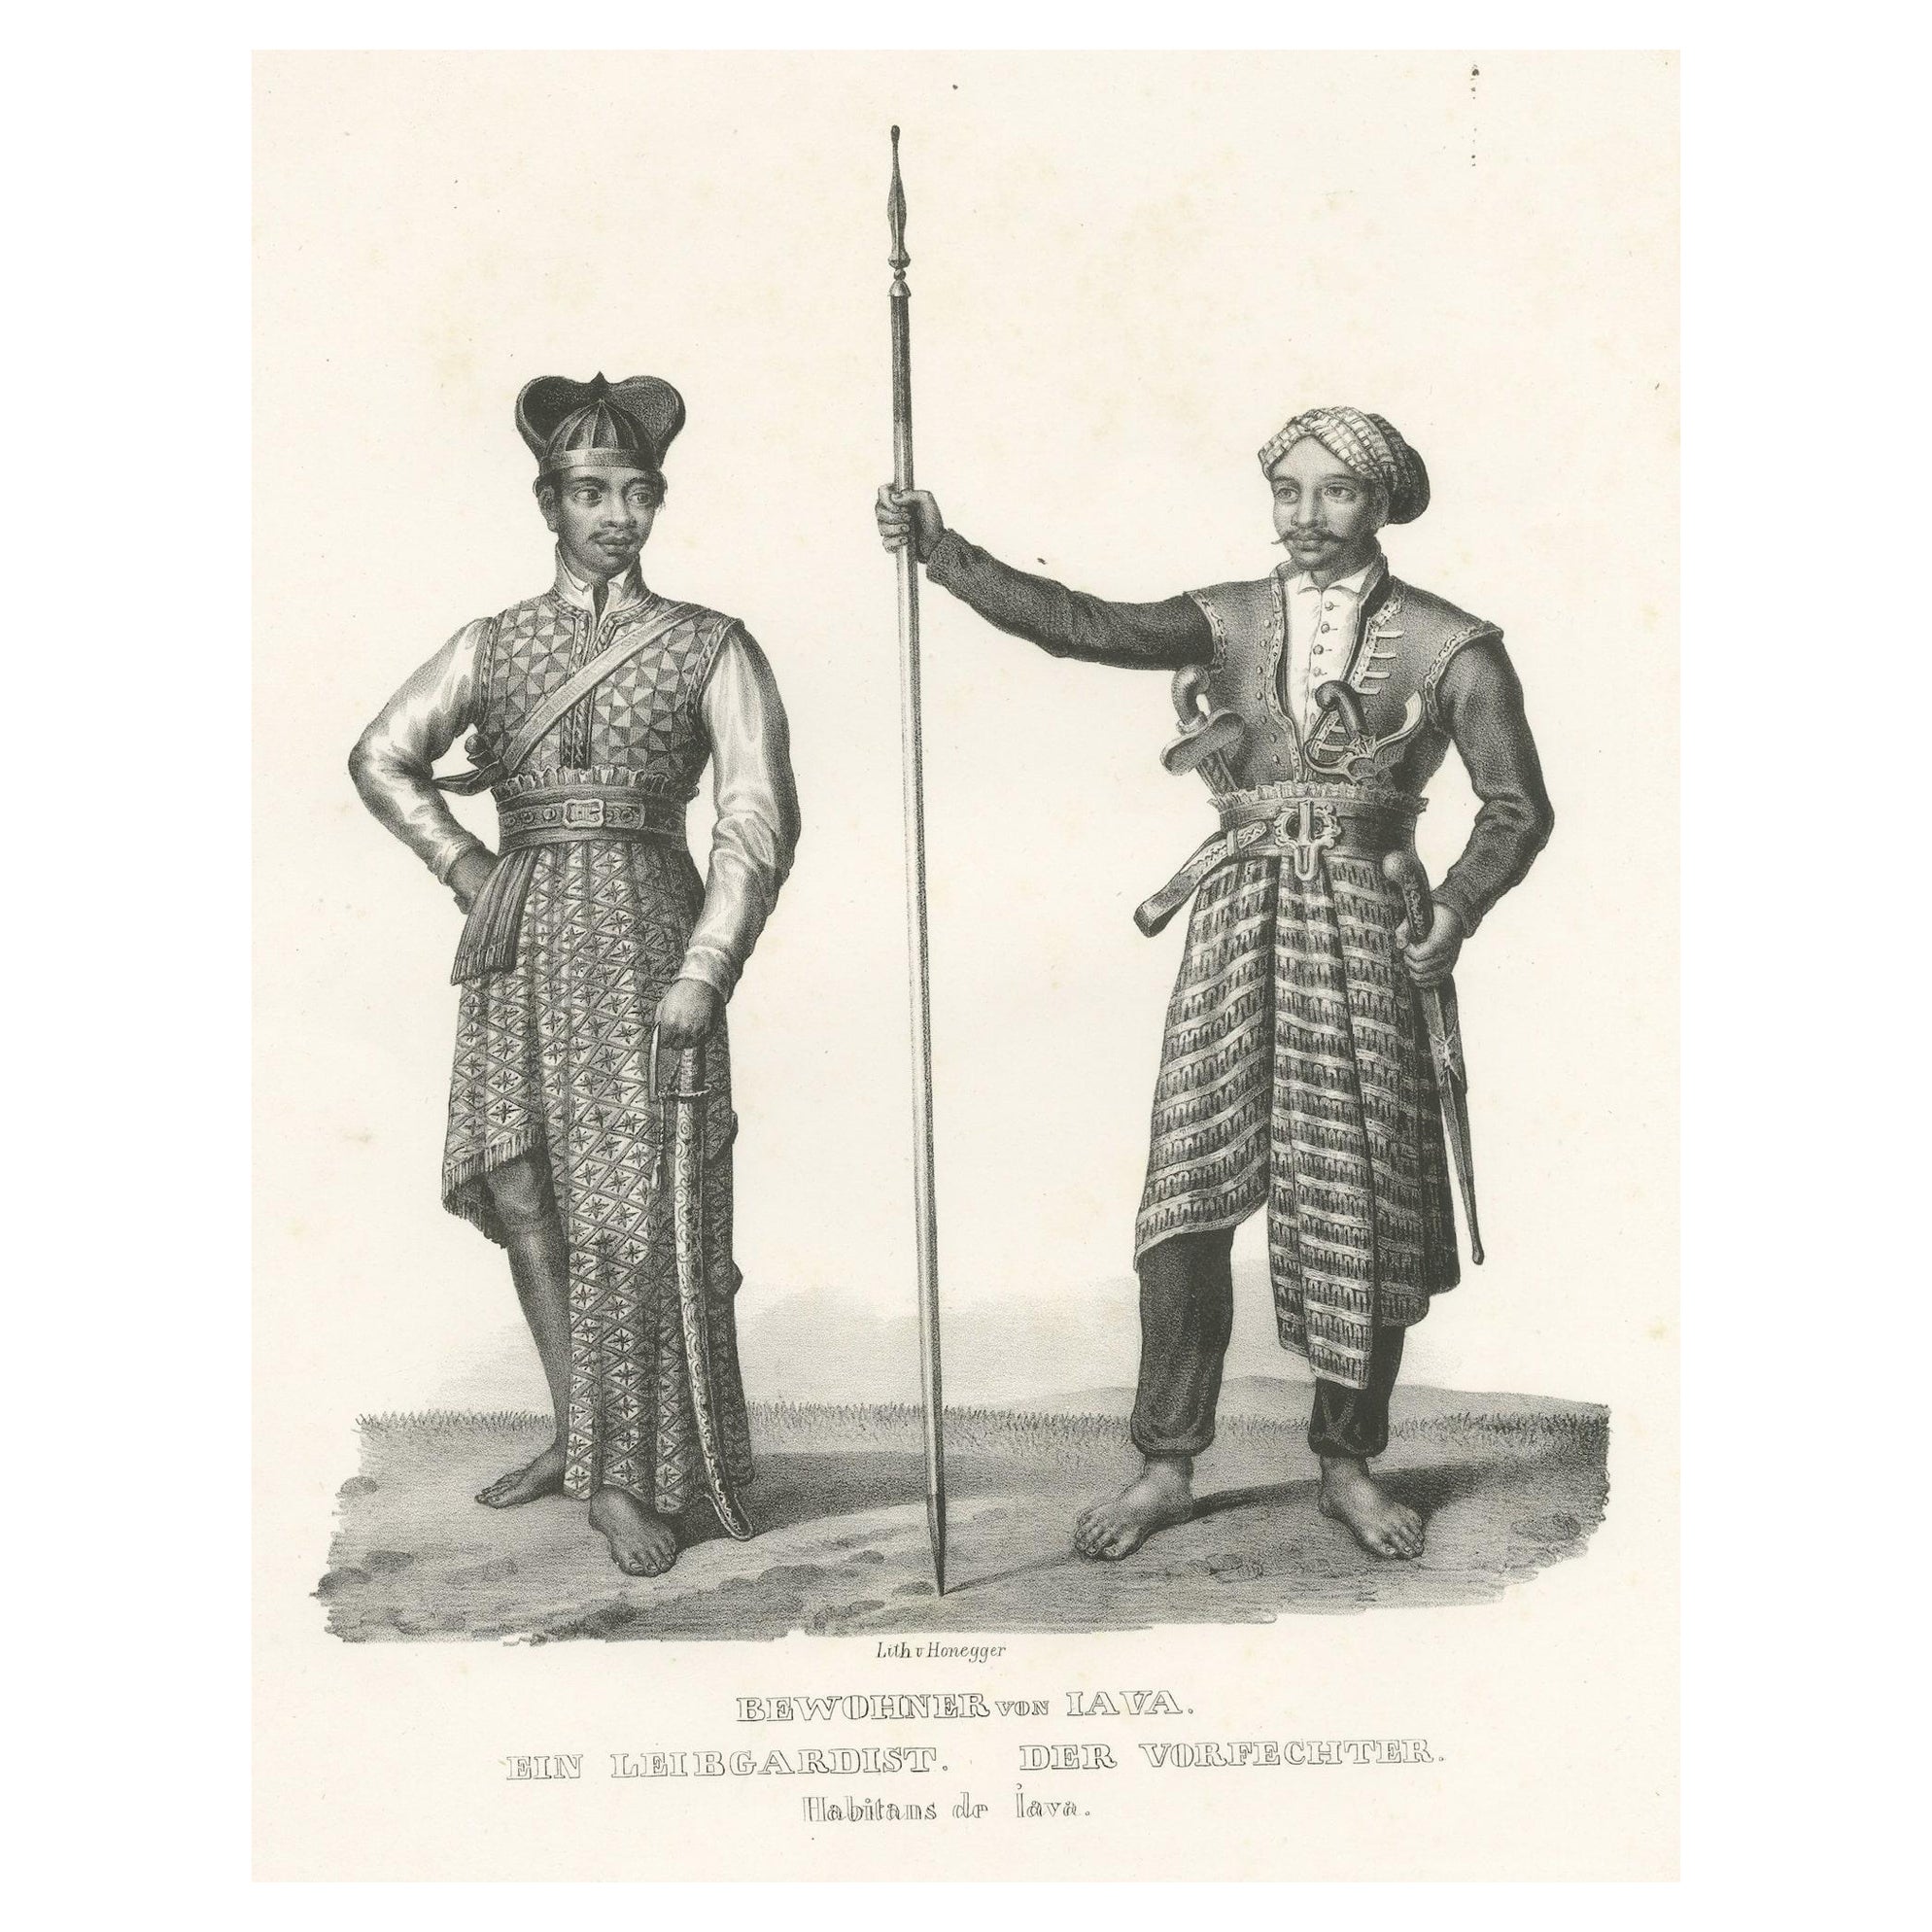 Antique Print of a Life Guard and Fighter of Java, Indonesia